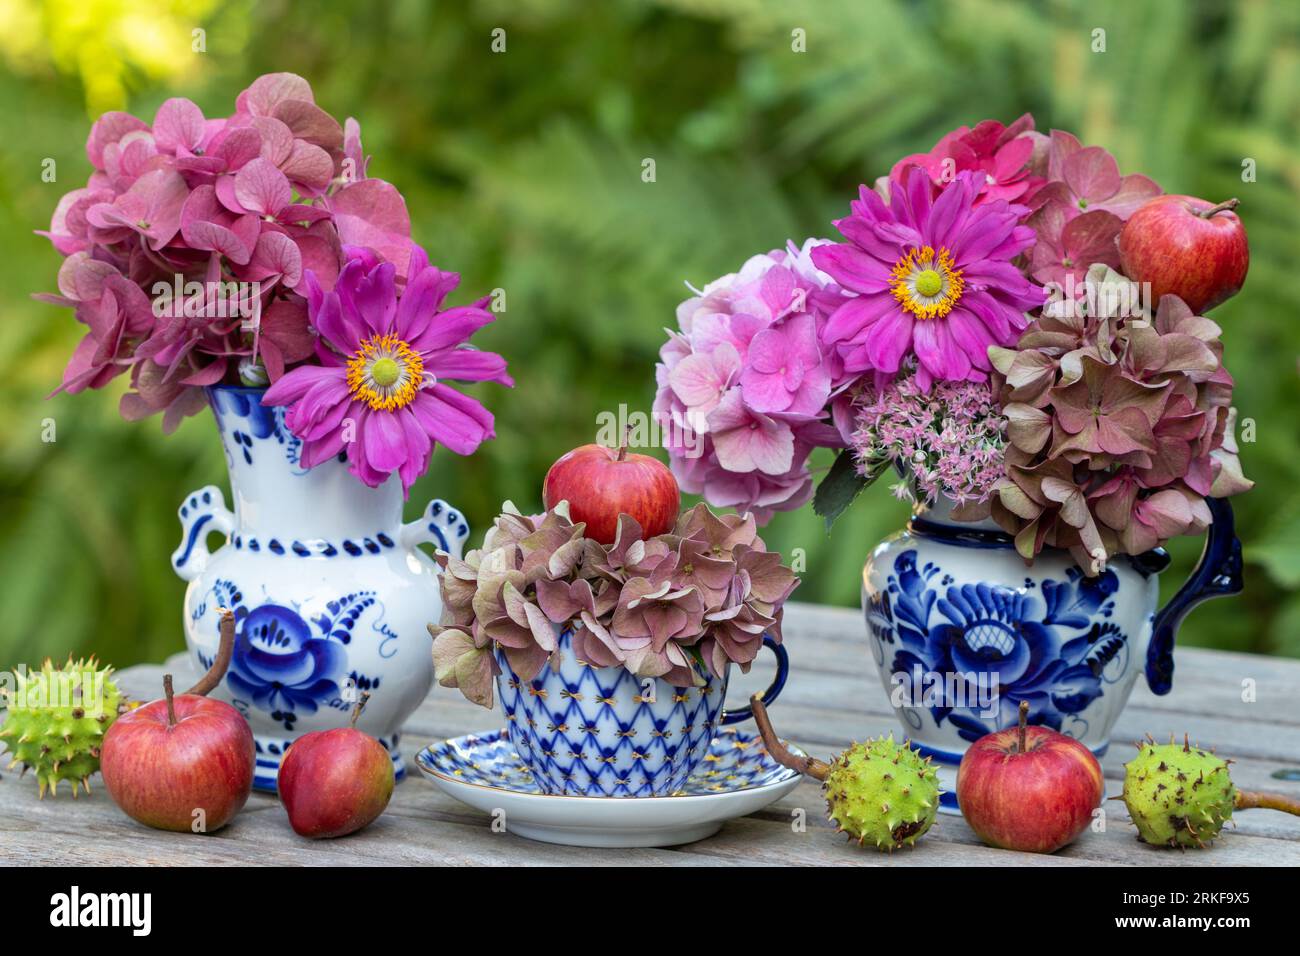 floral arrangement with vintage porcelaind, apples and bouquets of pink hydrangea flowers and japanese anemones Stock Photo